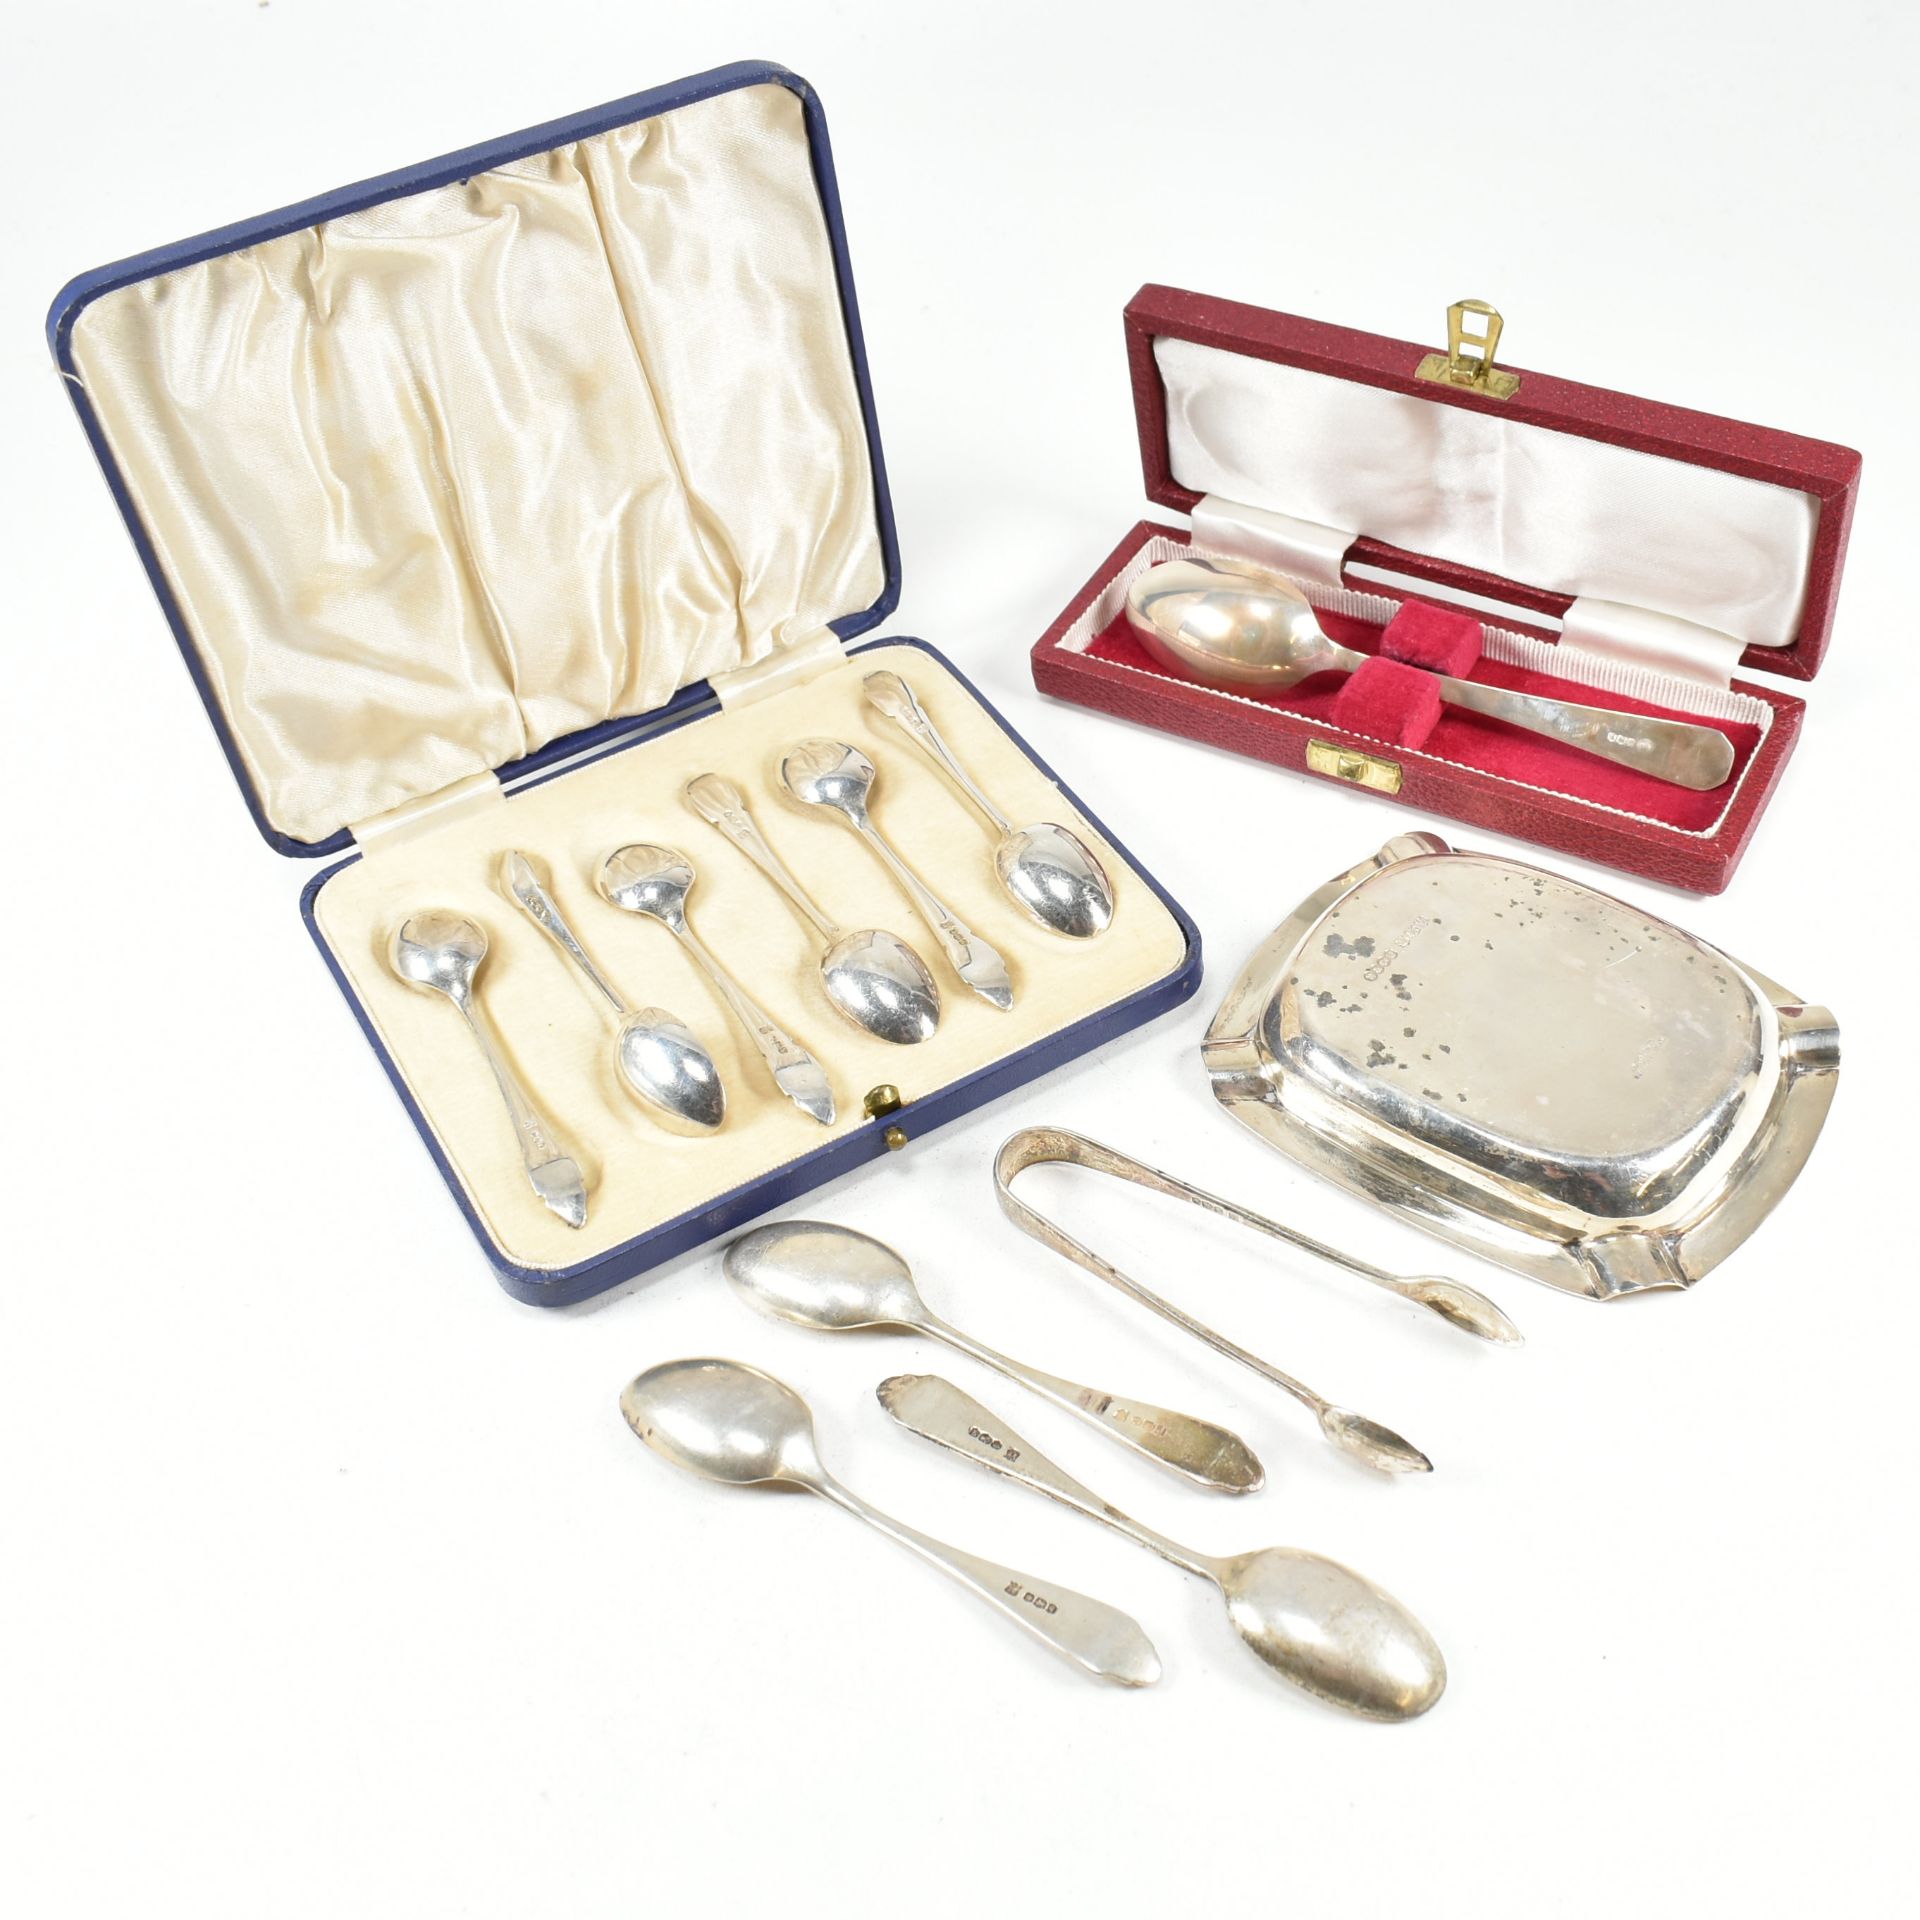 EARLY 20TH CENTURY HALLMARKED SILVER FLATWARE ITEMS - Image 7 of 11